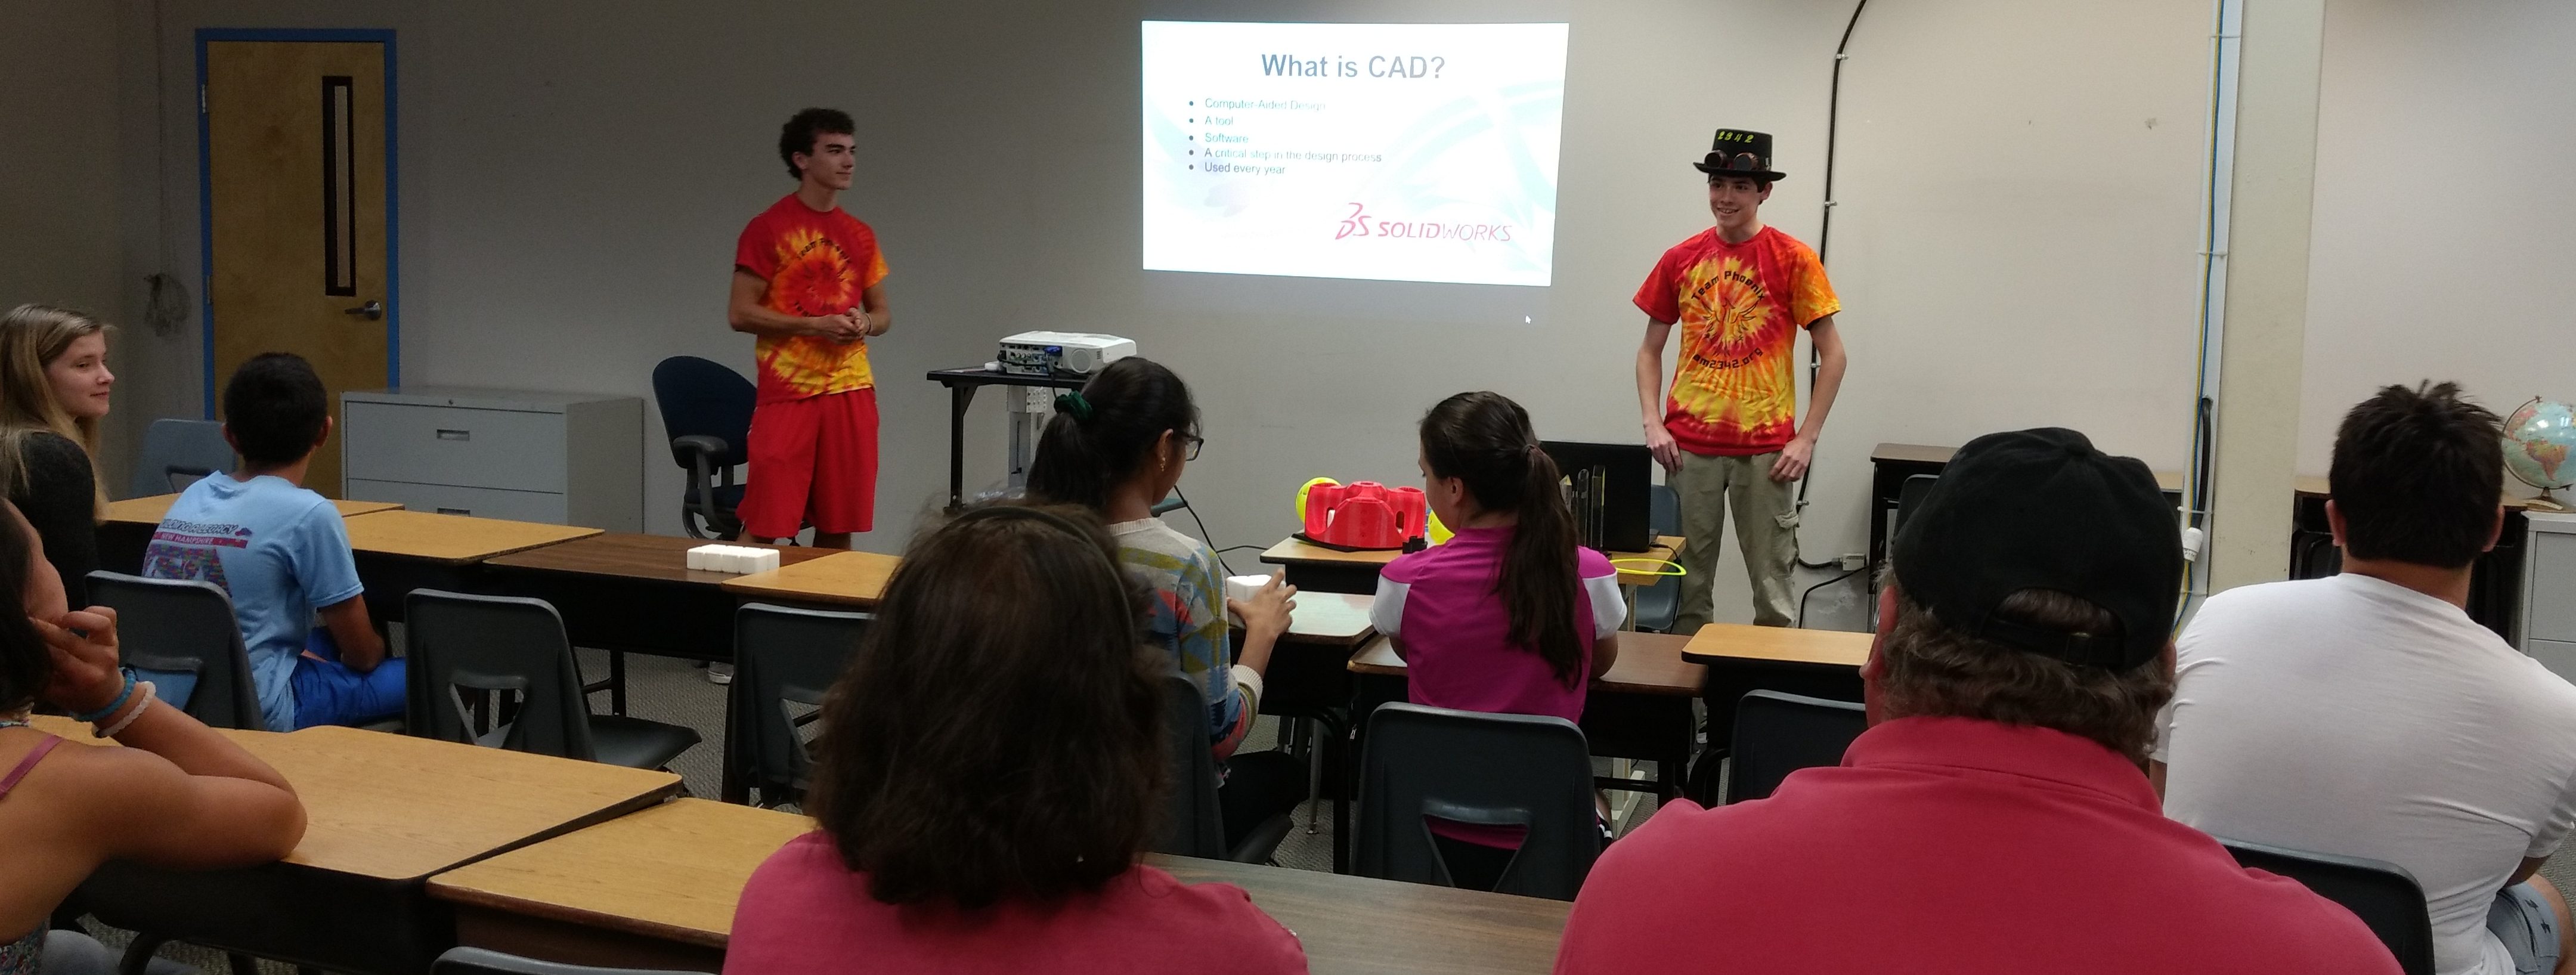 CAD Presentation at our Open House